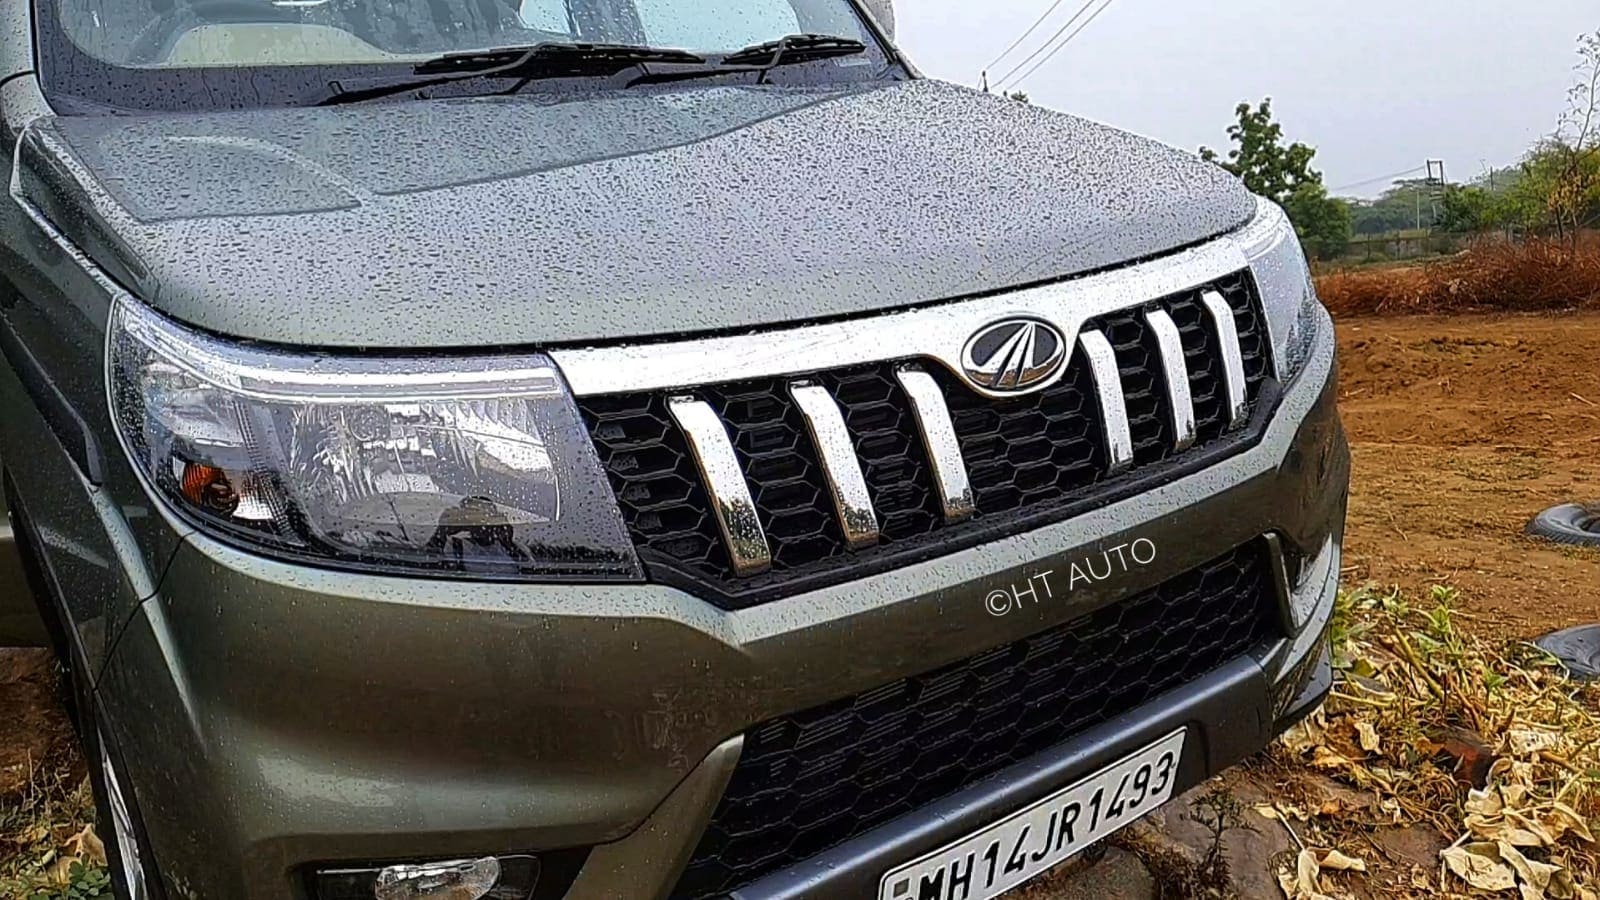 Bending headlights with DRLs and a strong grills design help Mahindra Bolero Neo get a macho face.